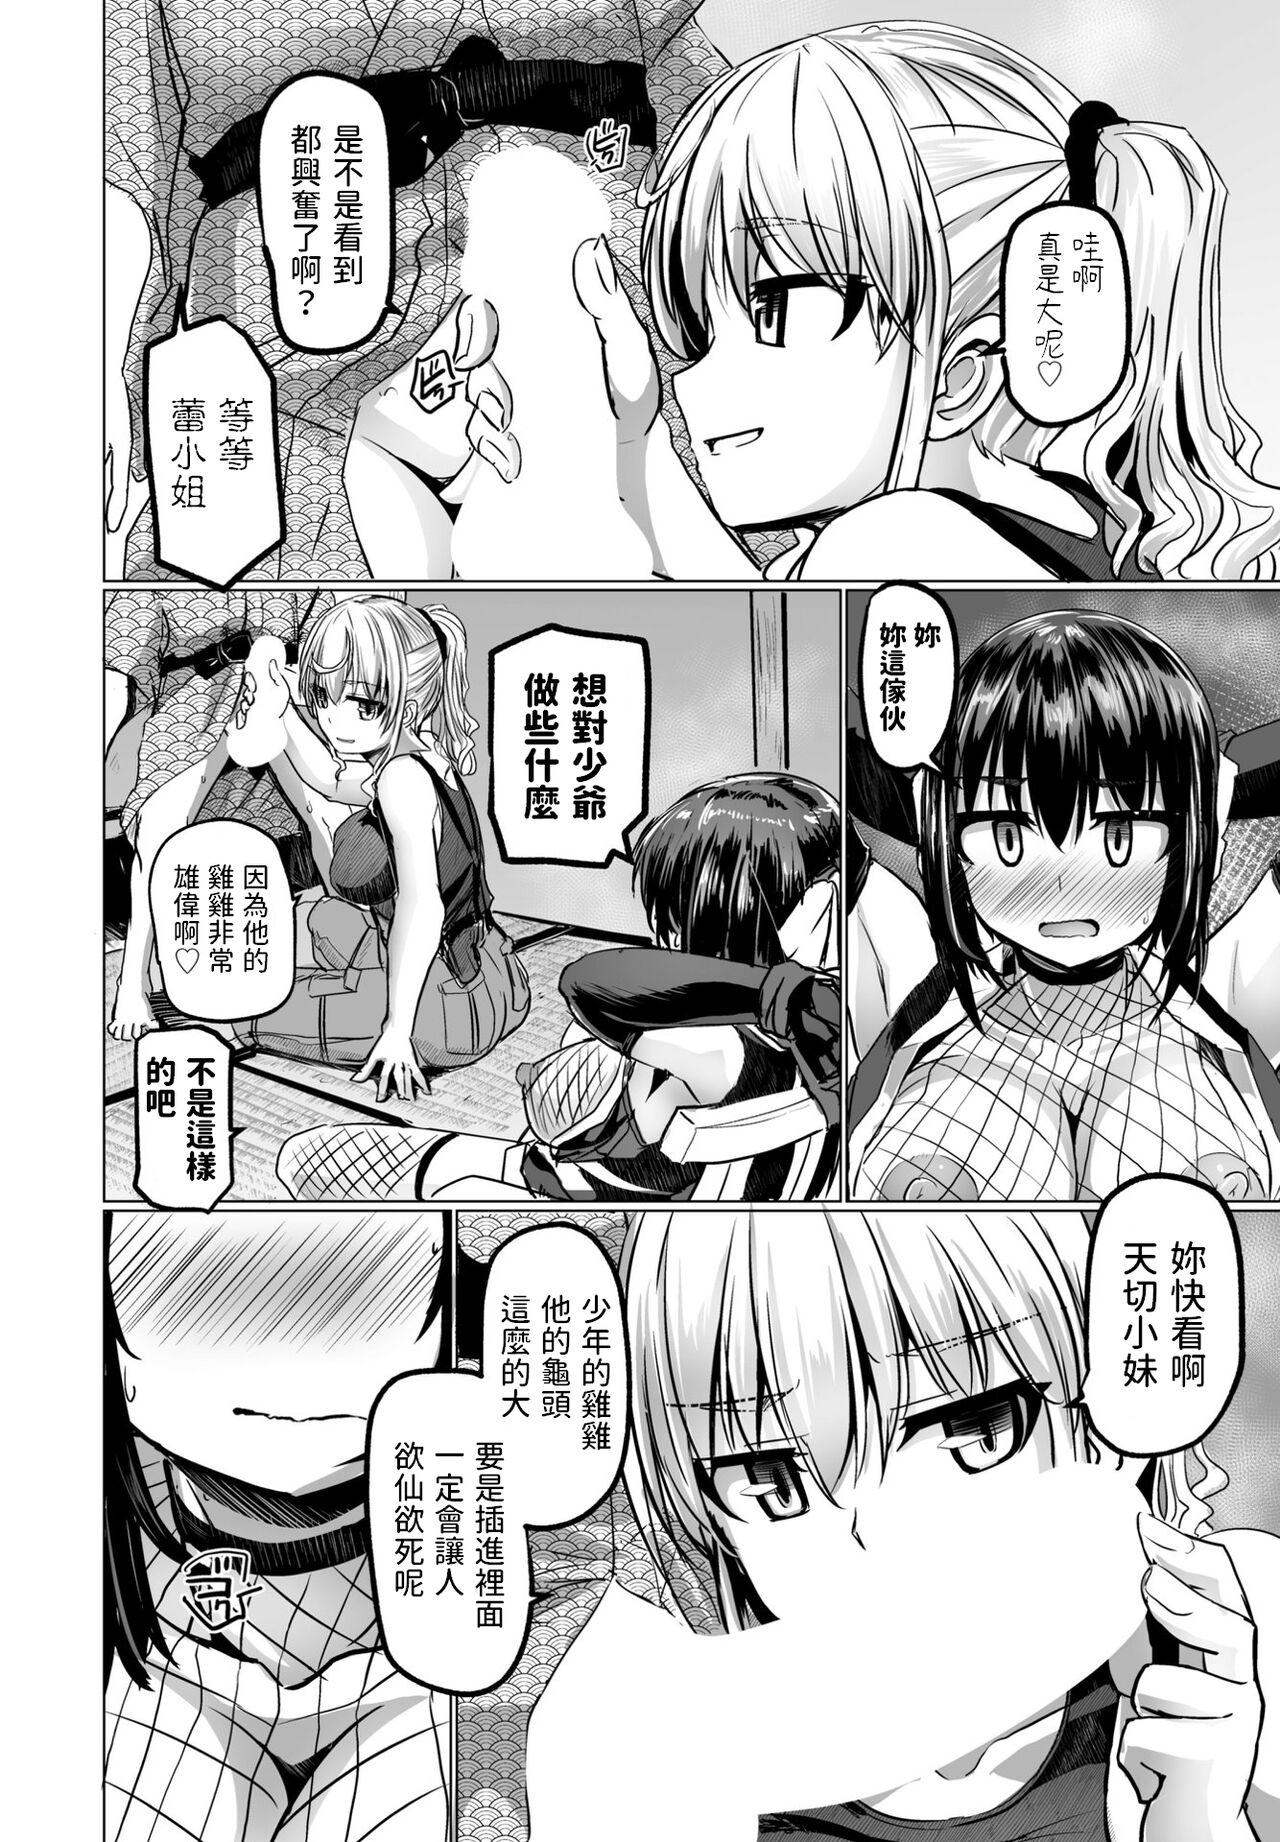 Russia THE NAKASEN DRIVER Ch. 3 Polla - Page 12